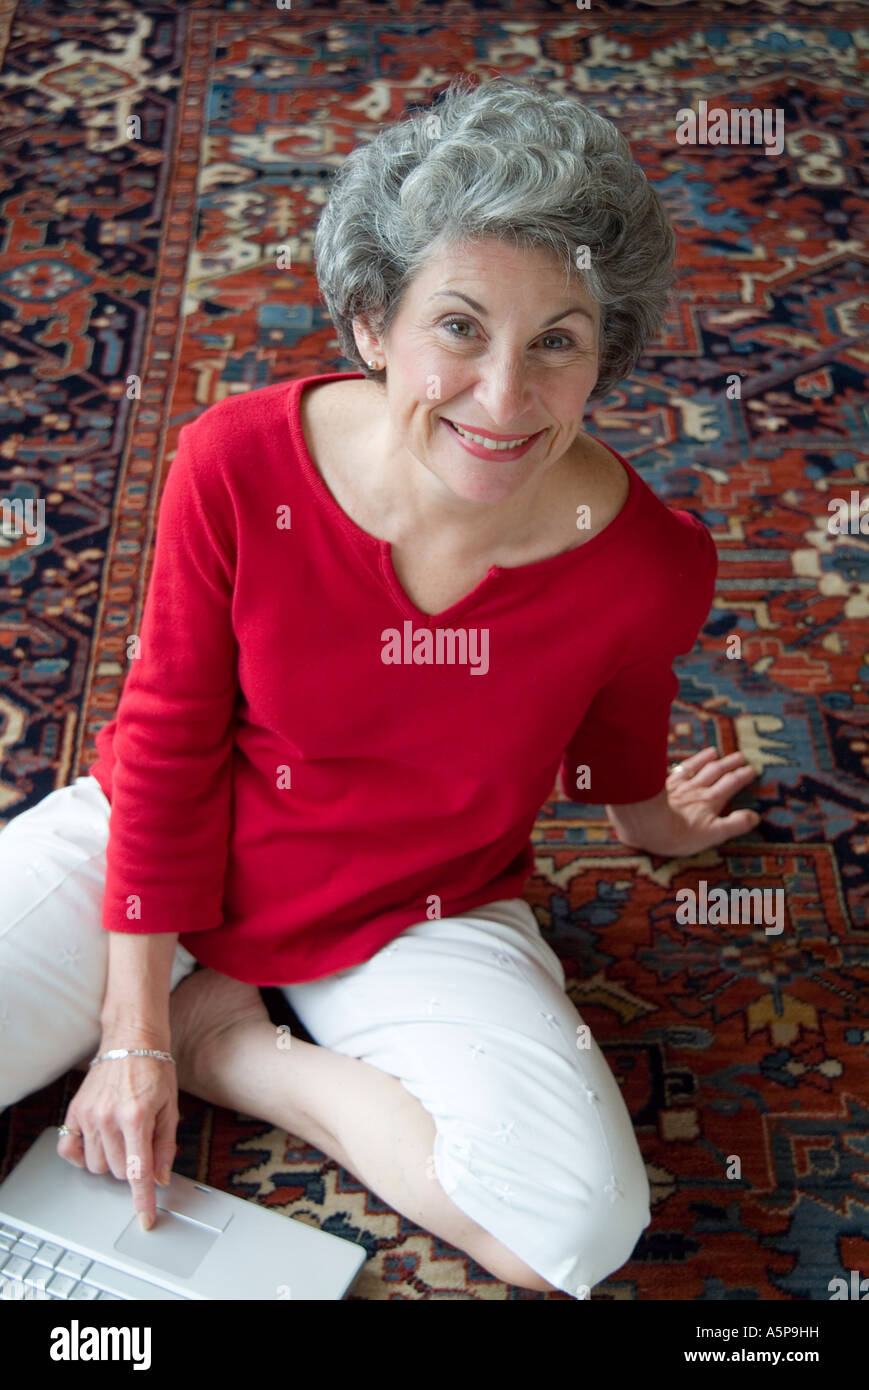 Senior woman at home with computer on carpet, smiling at camera. Stock Photo